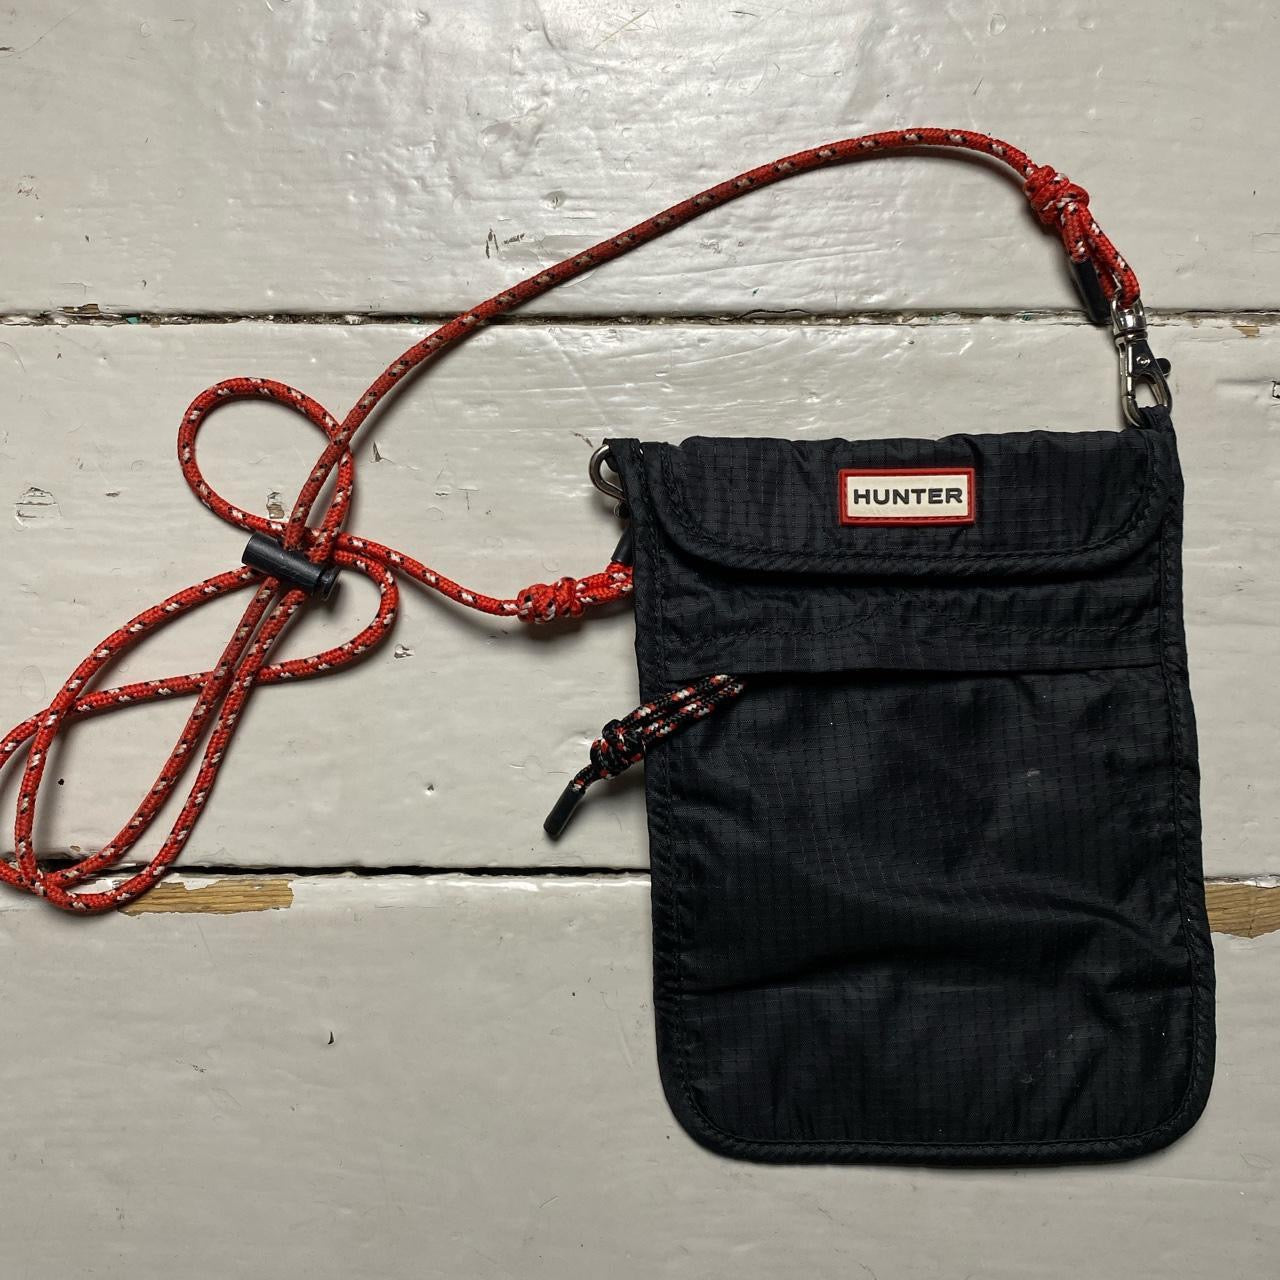 Hunter Small Pouch Bag